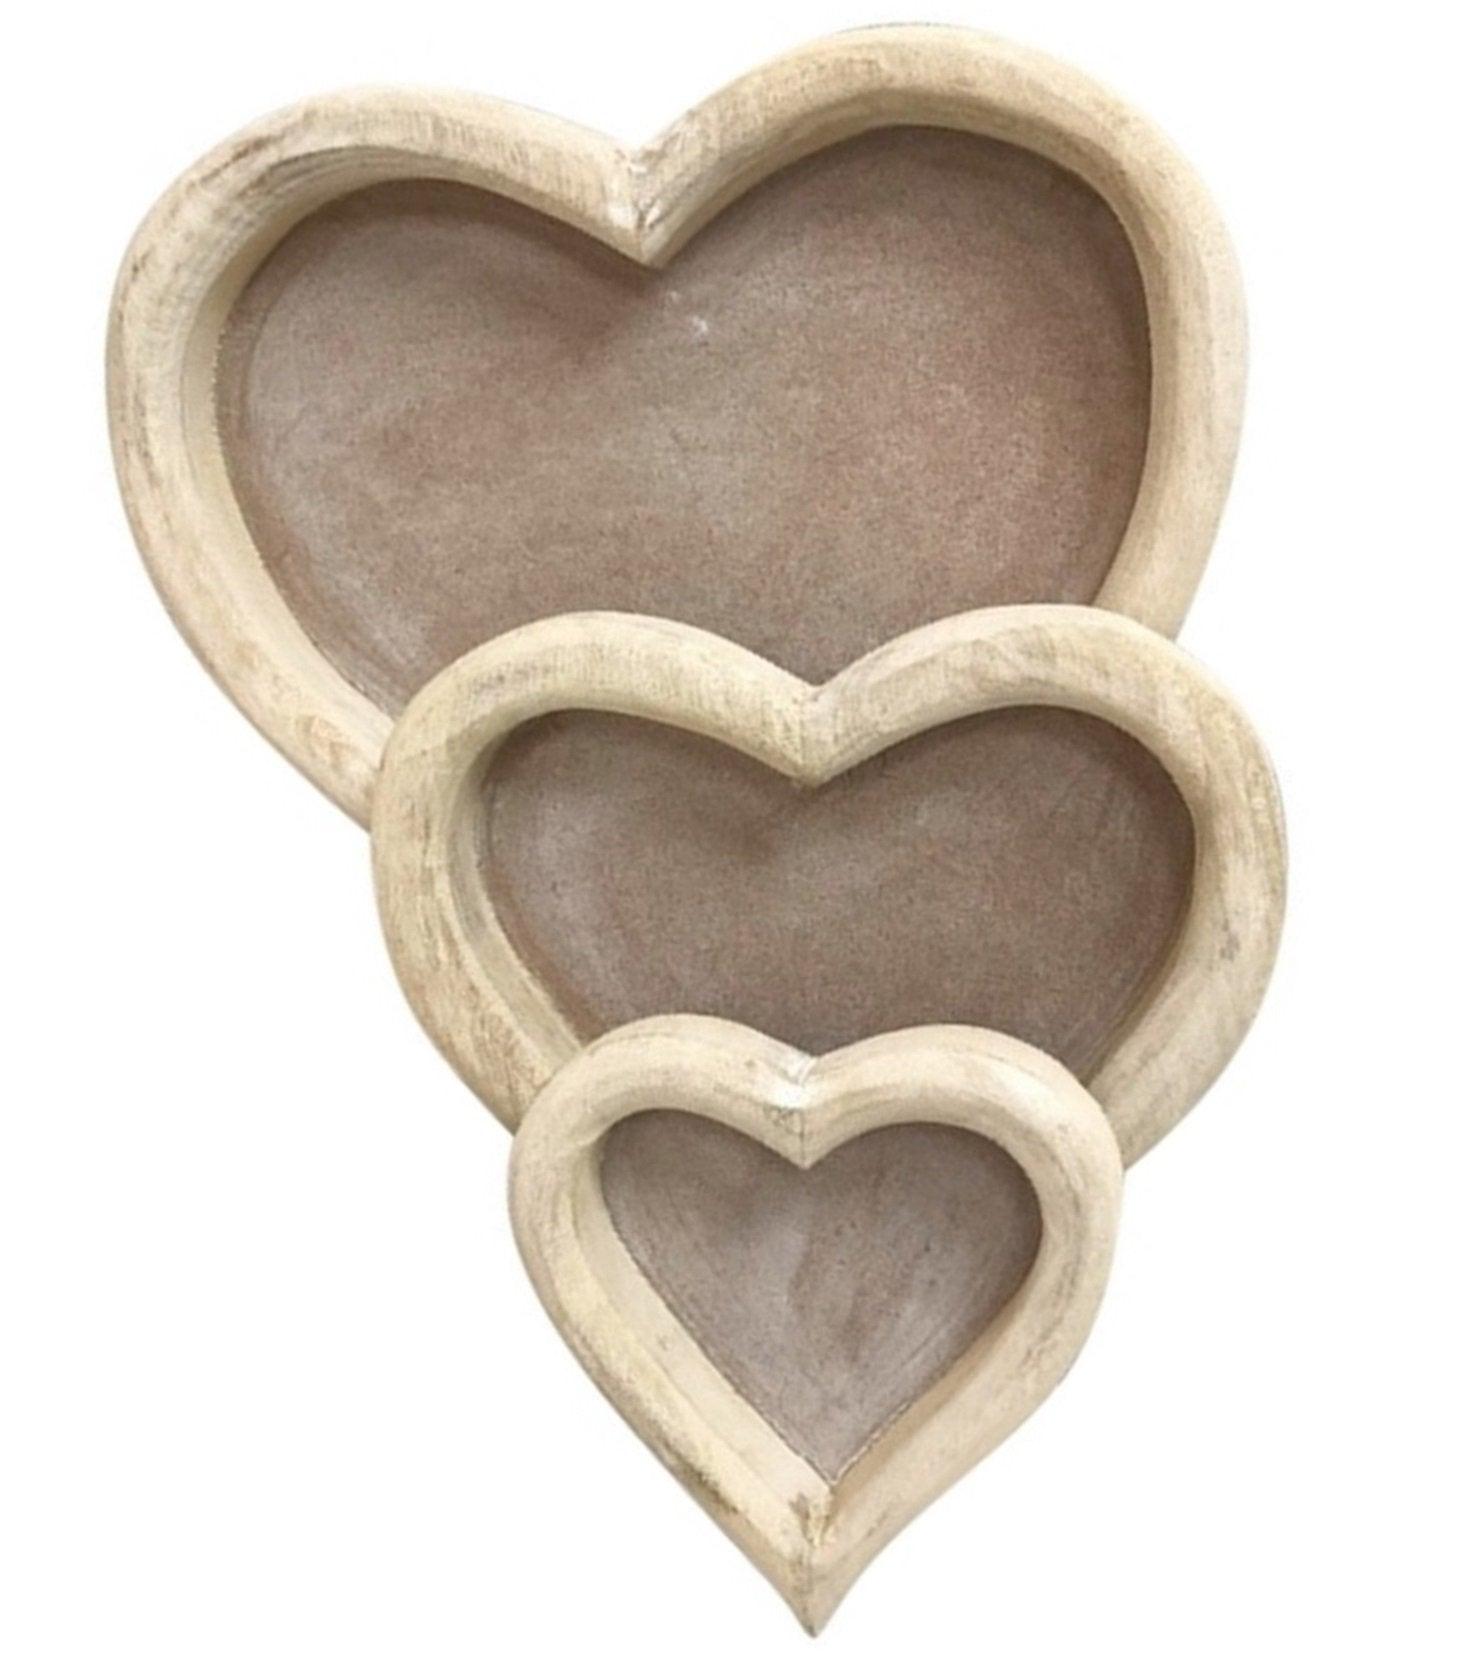 View Three Wooden Heart Trays information